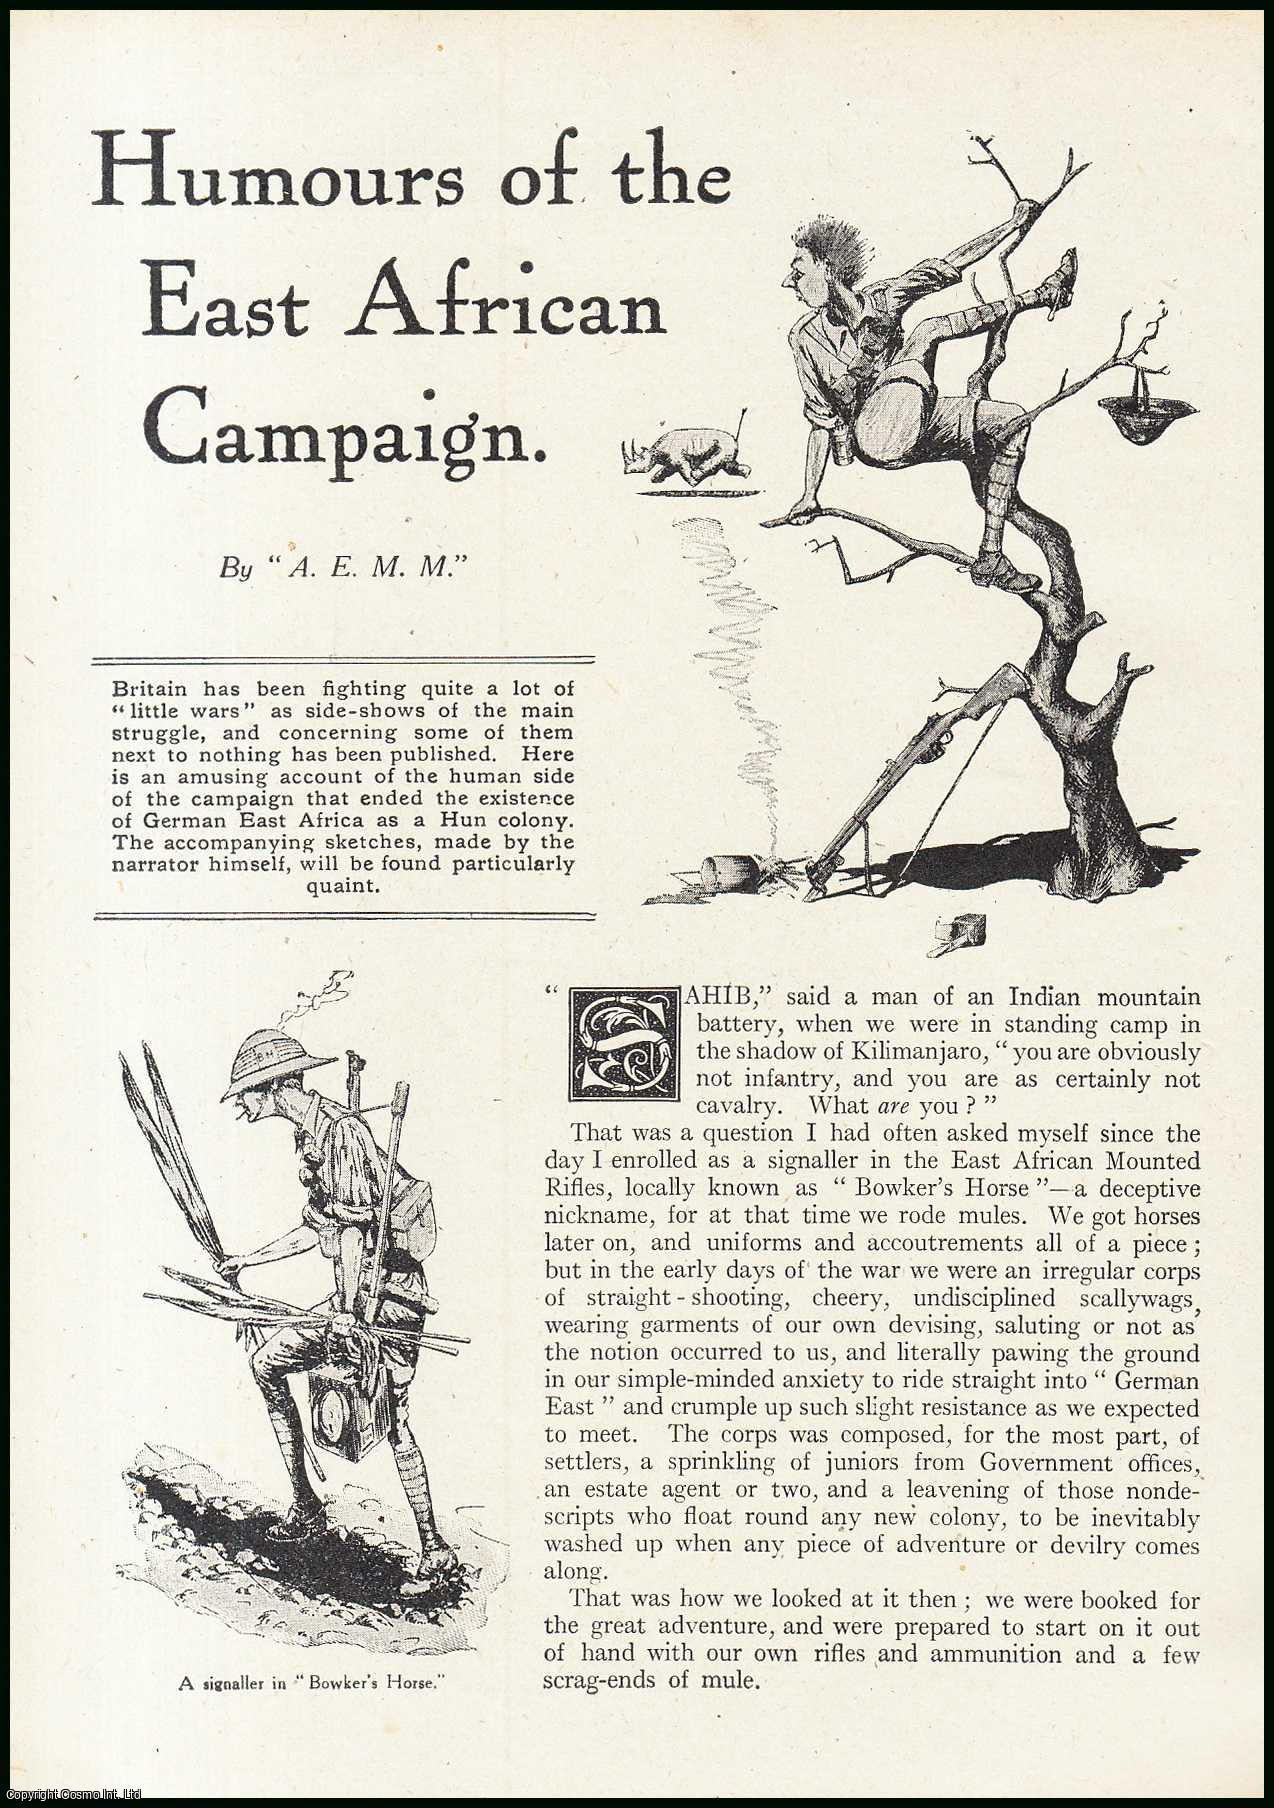 A.E.M.M. - Humours of the East African Campaign. An uncommon original article from the Wide World Magazine, 1917.